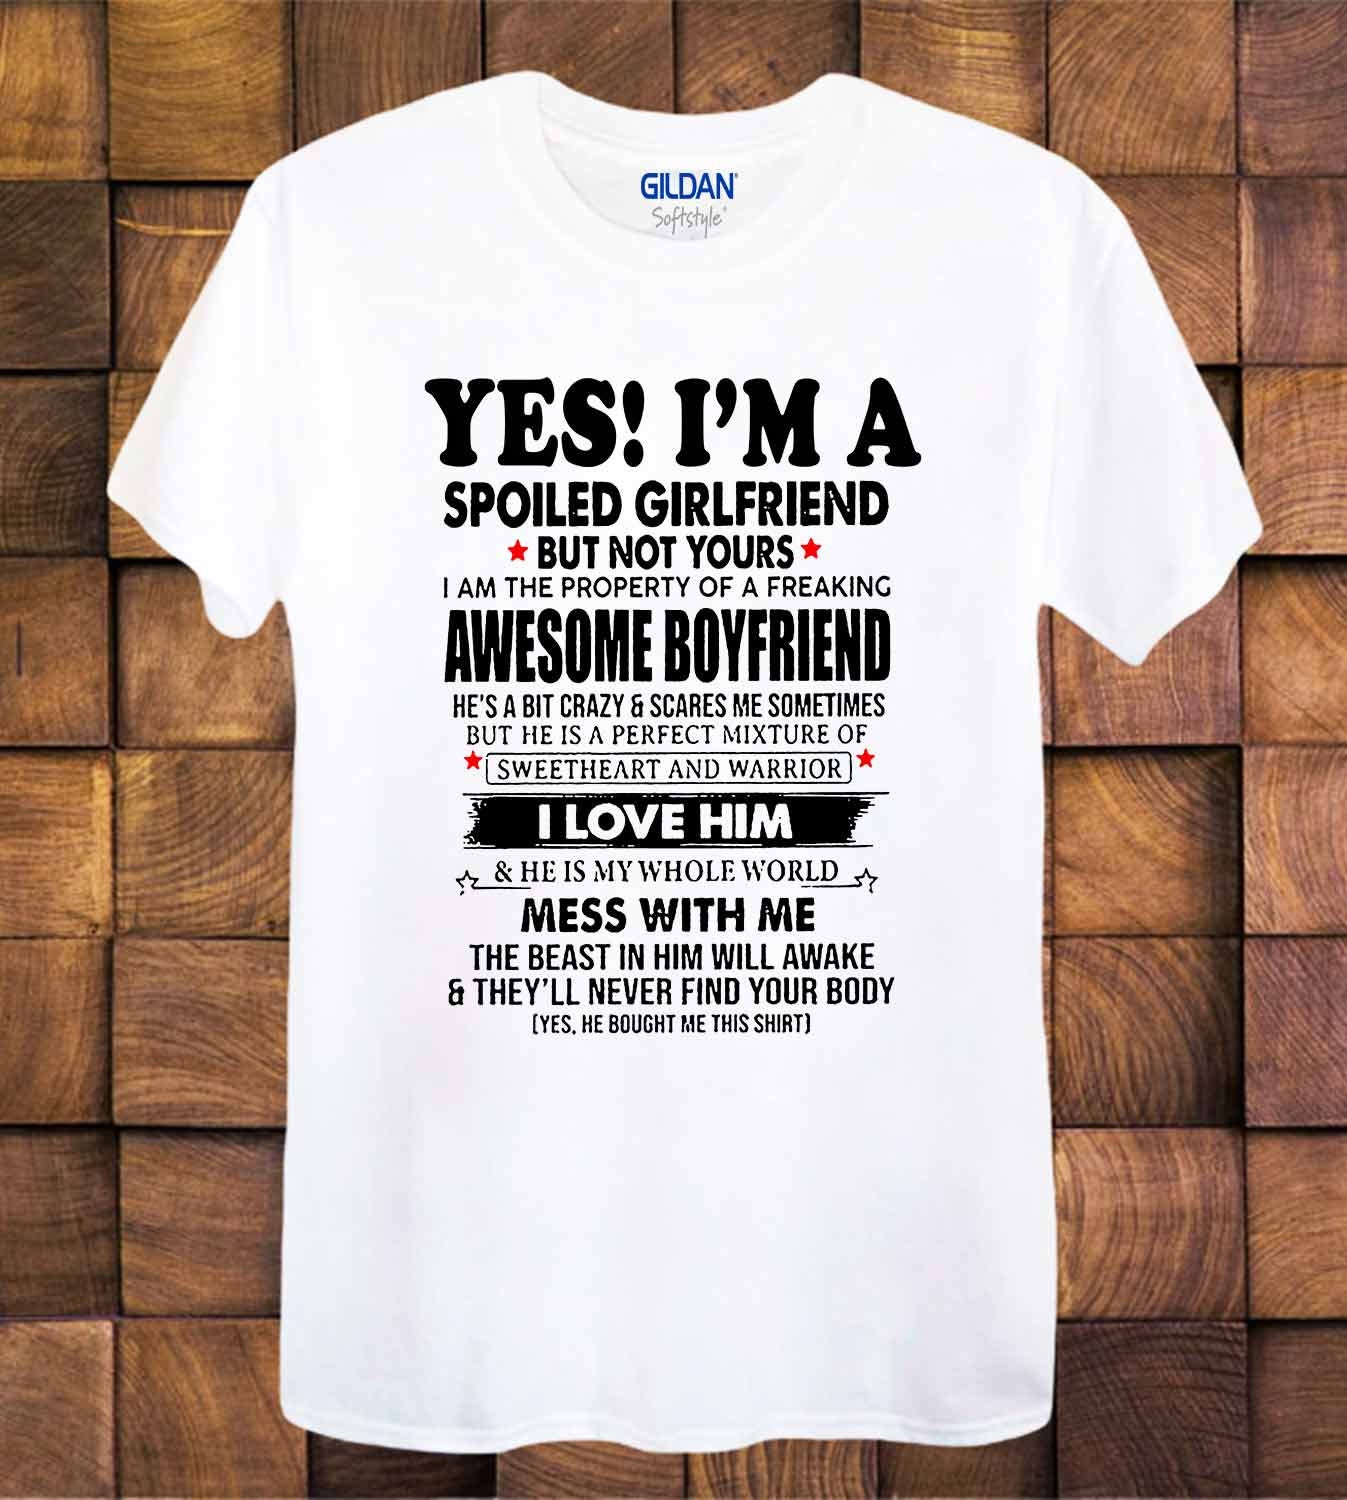 Yes I'm A Spoiled Girlfriend T Shirt ideal present gift | Etsy